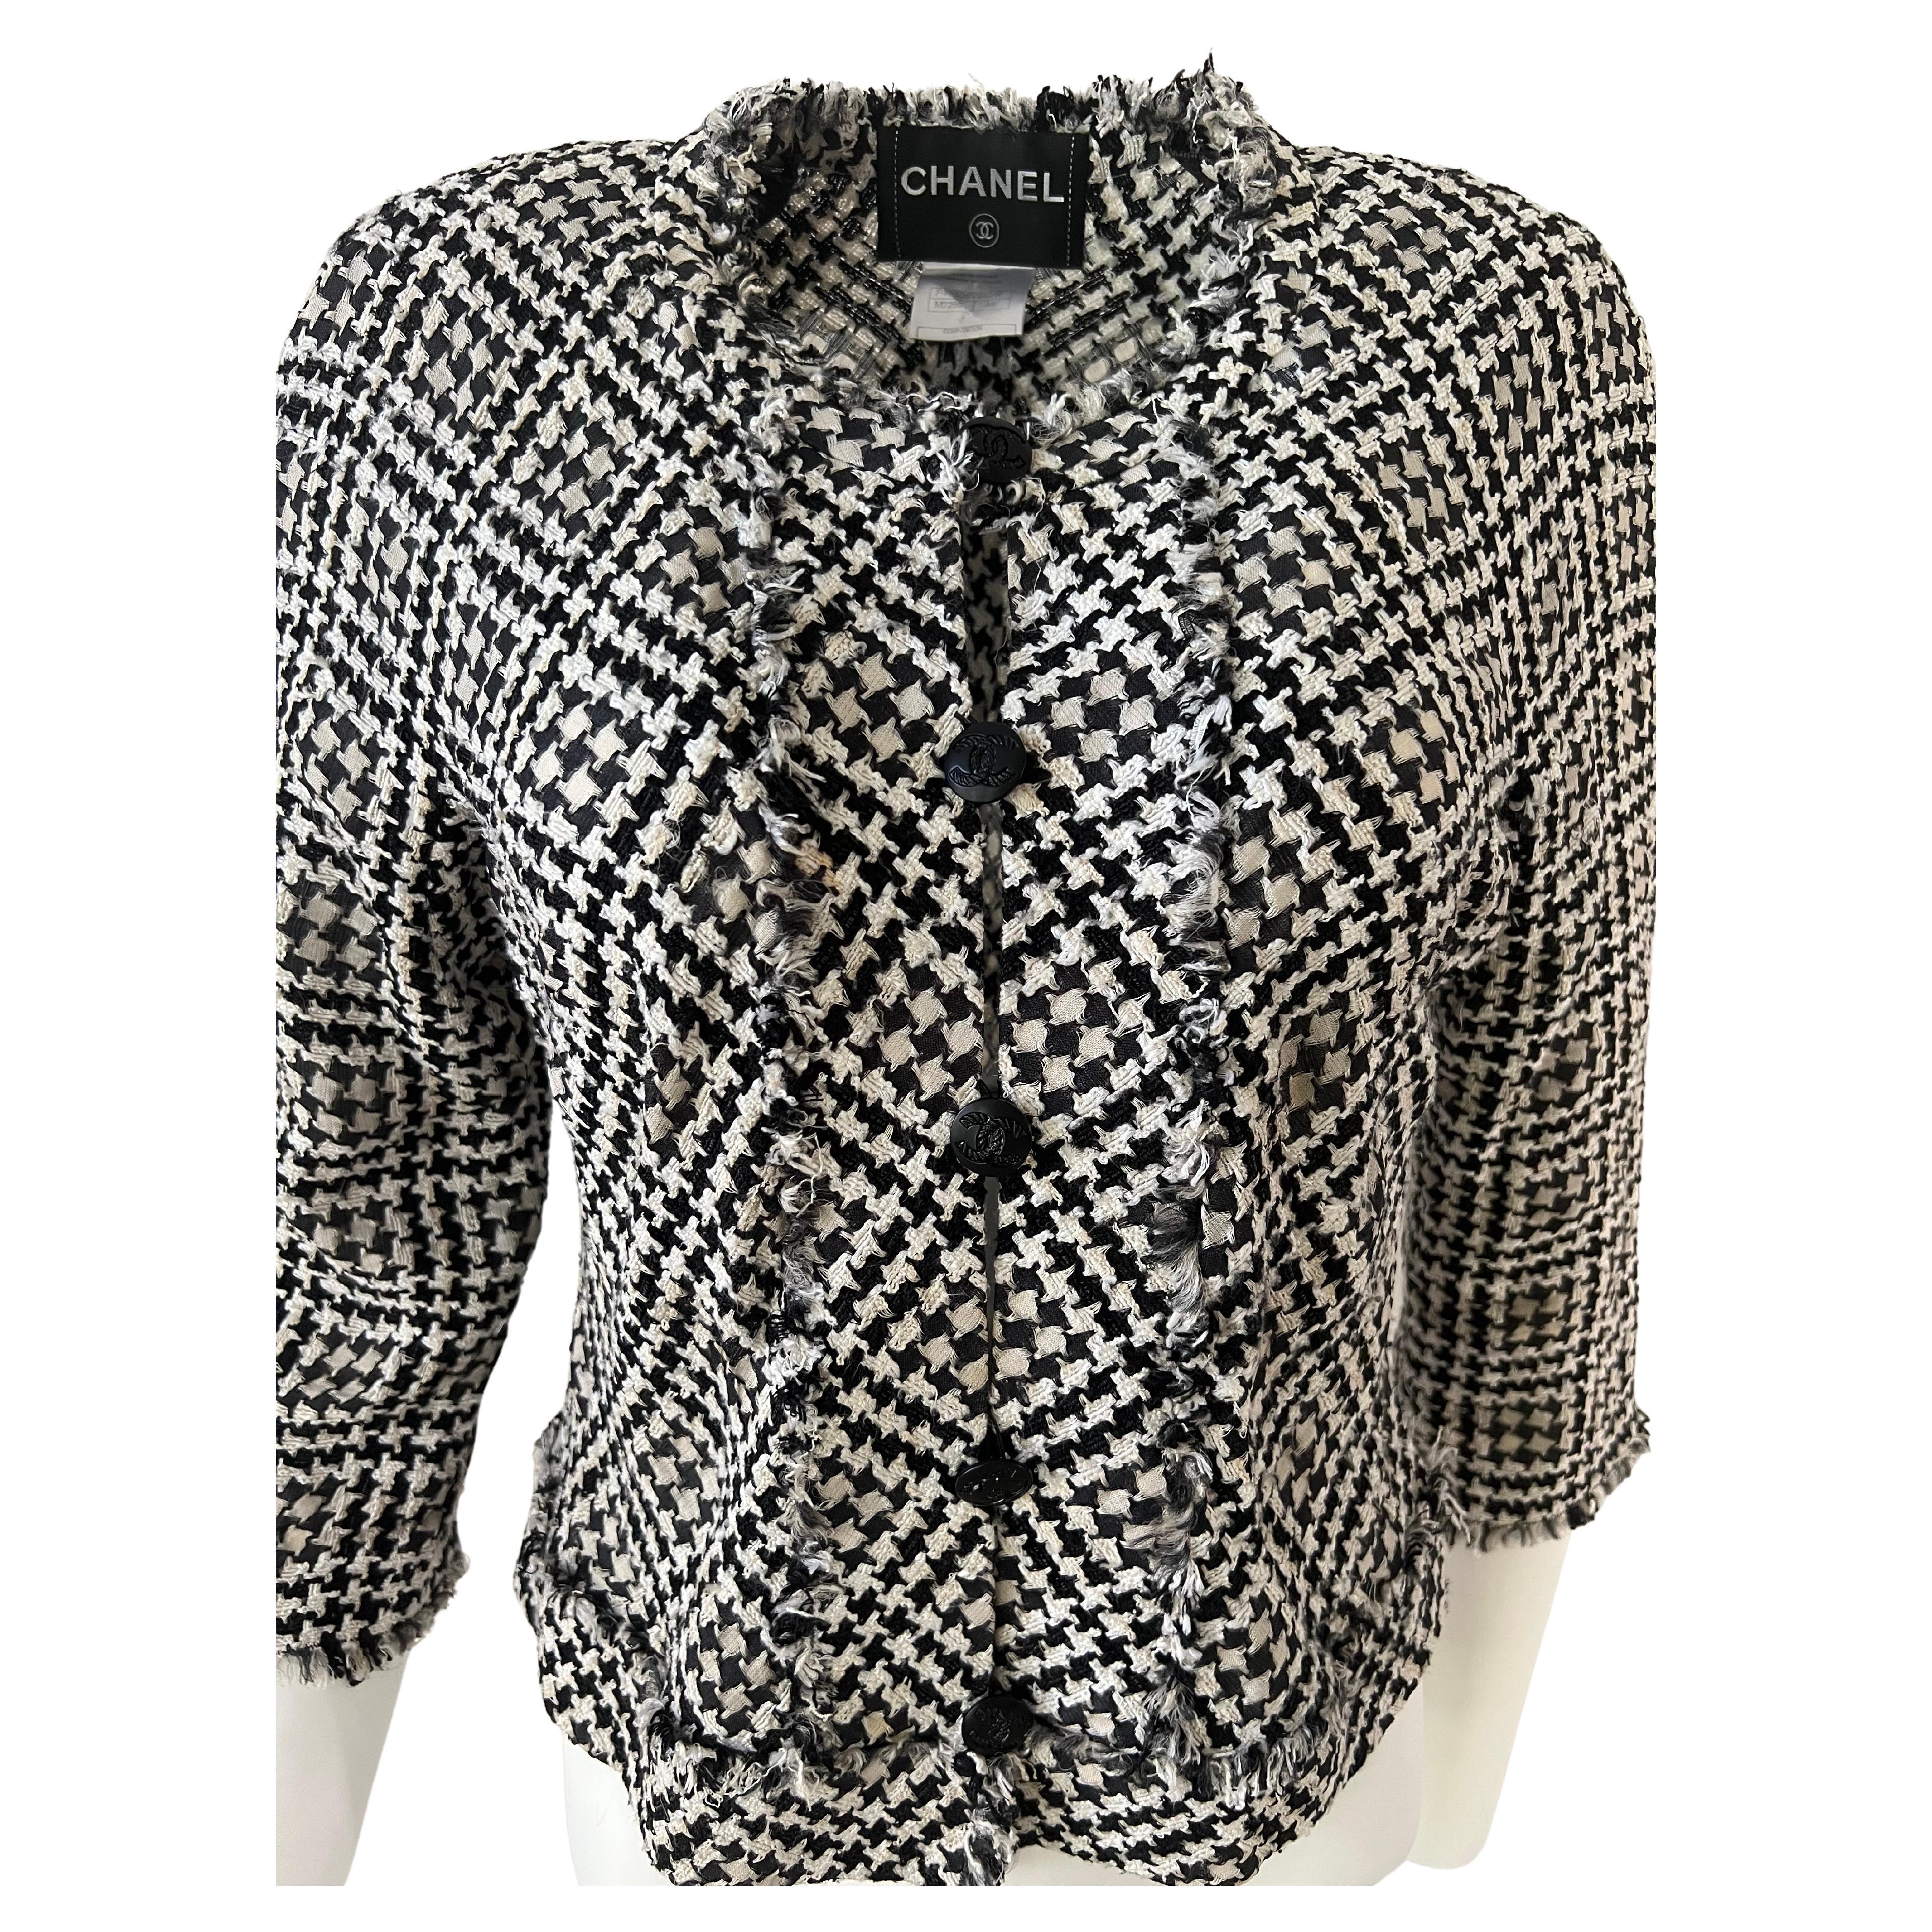 Women's or Men's Chanel Dogtooth Checkerboard Black an White Jacket For Sale